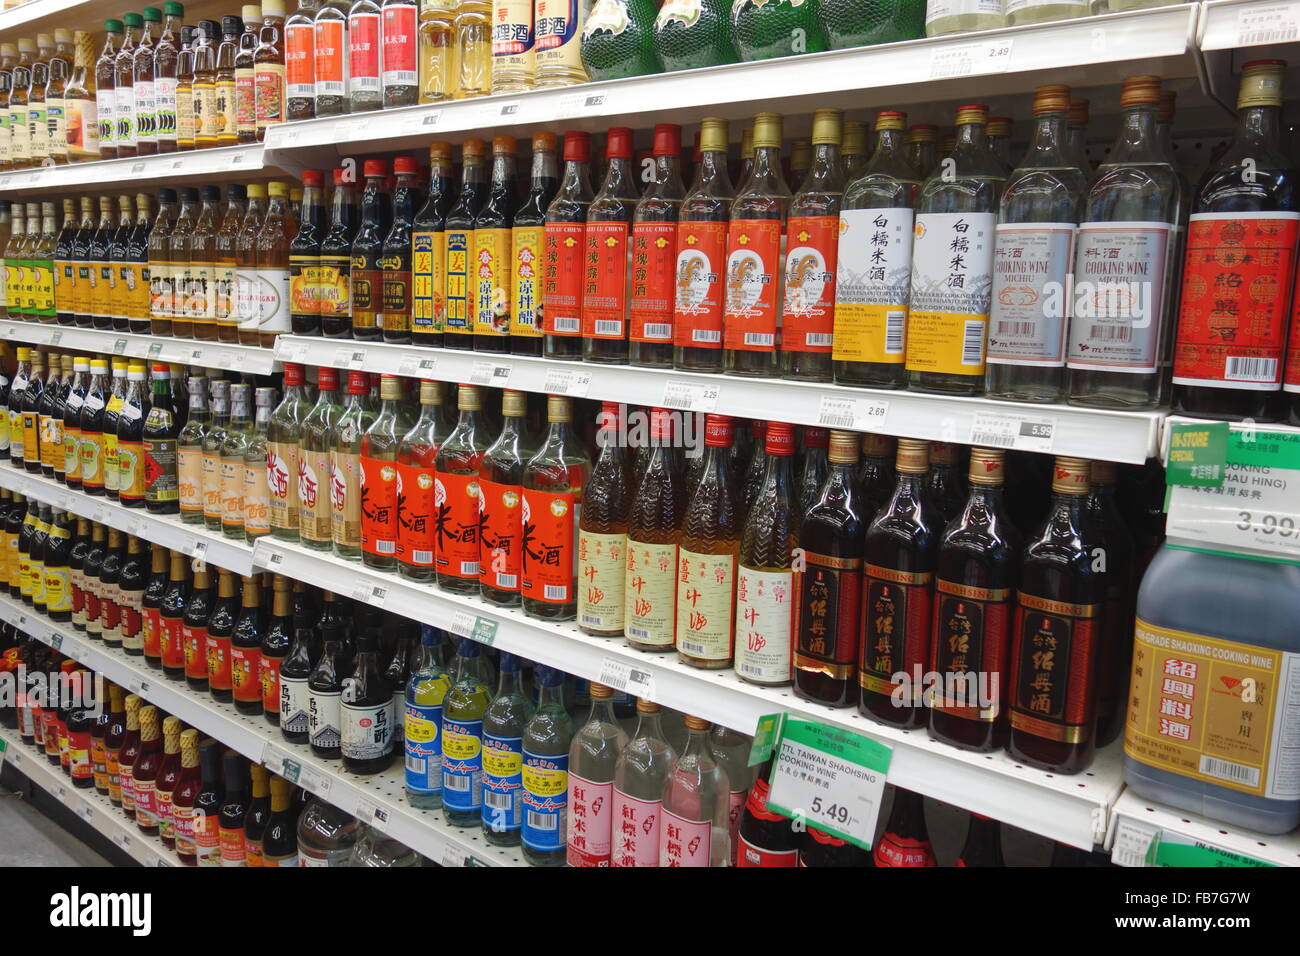 Chinese cooking wines and vinegar bottles at a supermarket in Toronto, Canada Stock Photo